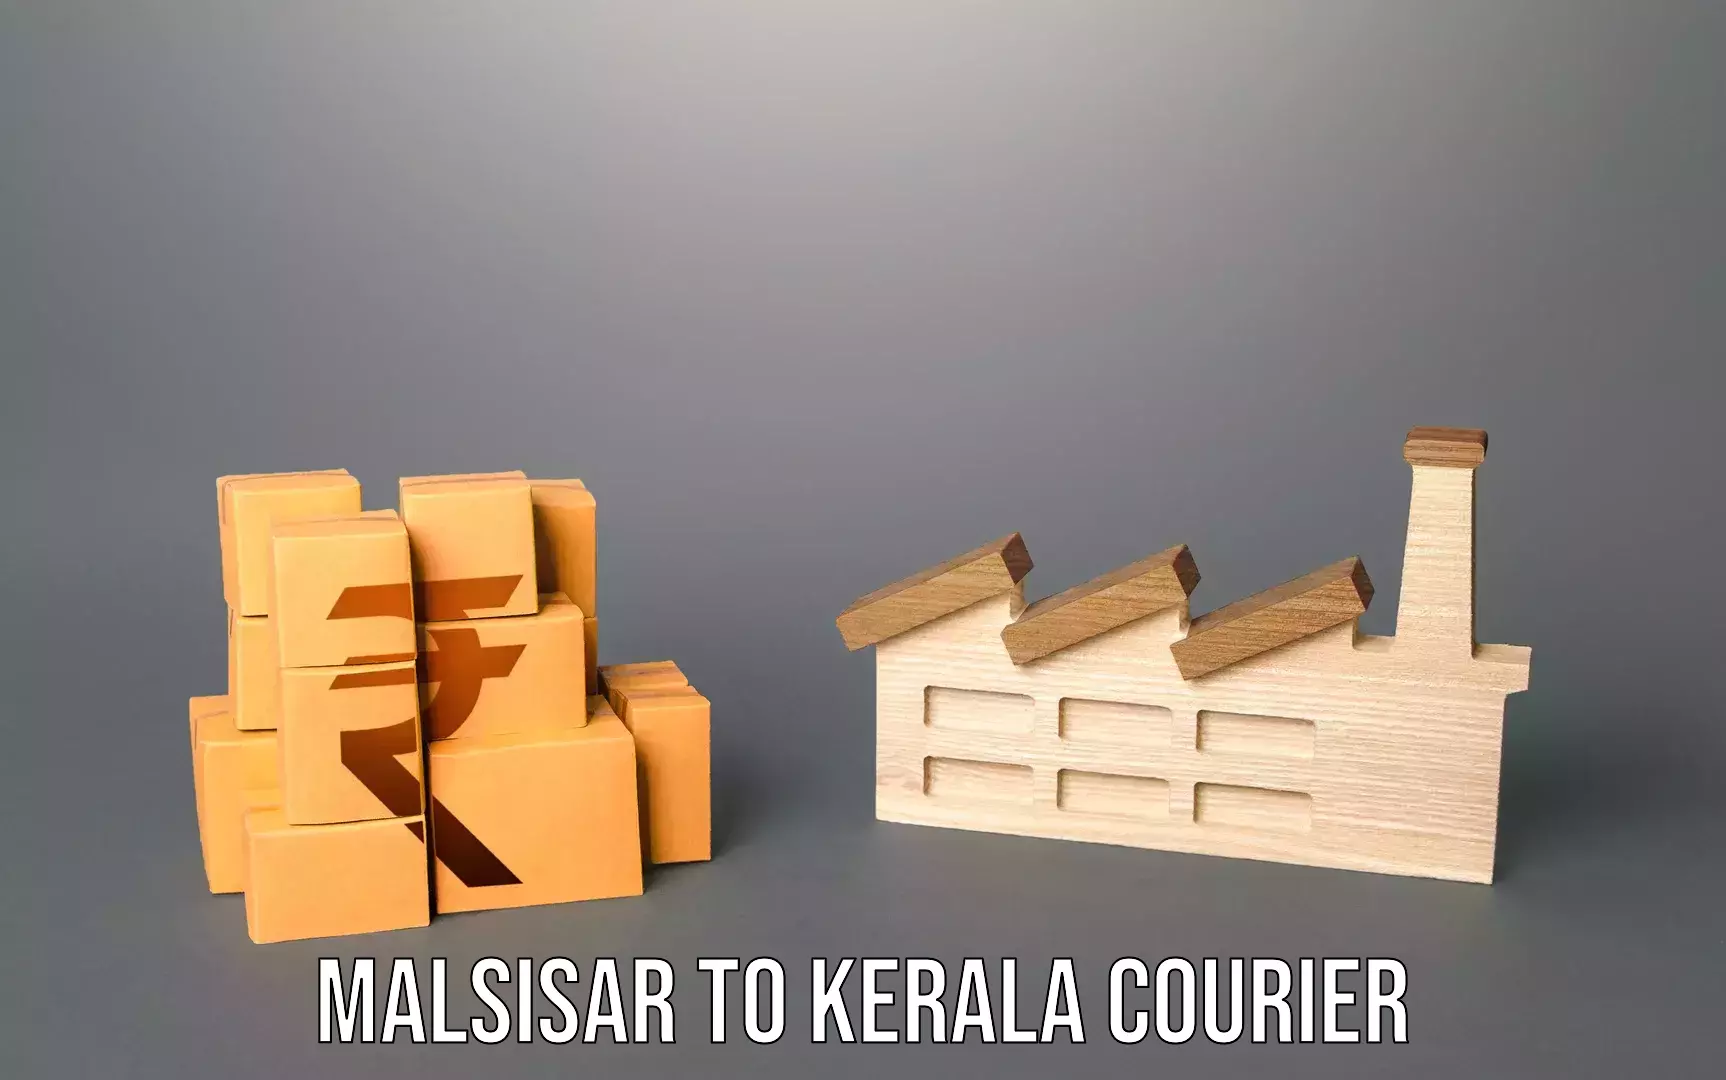 Luggage delivery app Malsisar to Kerala